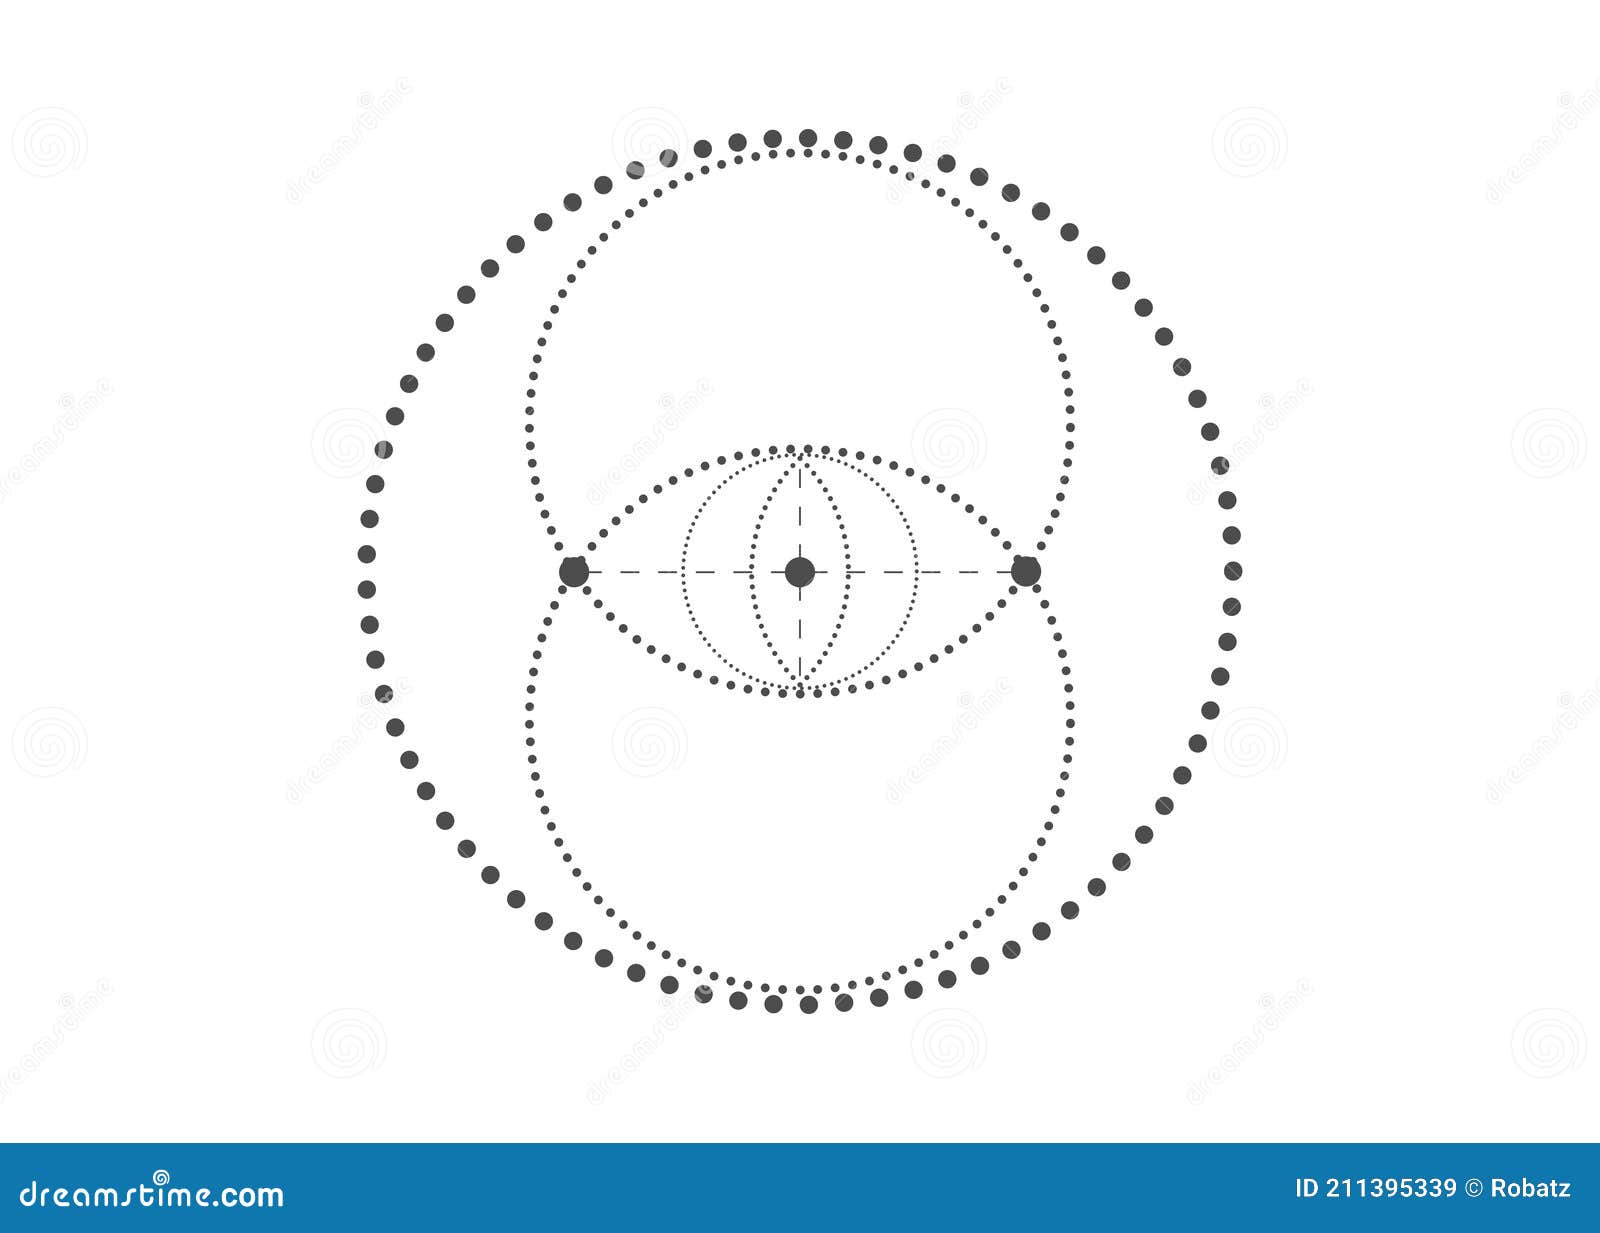 vesica piscis sacred geometry. all seeing eye, the third eye or the eye of providence inside dotted circles. the eye of phi mystic